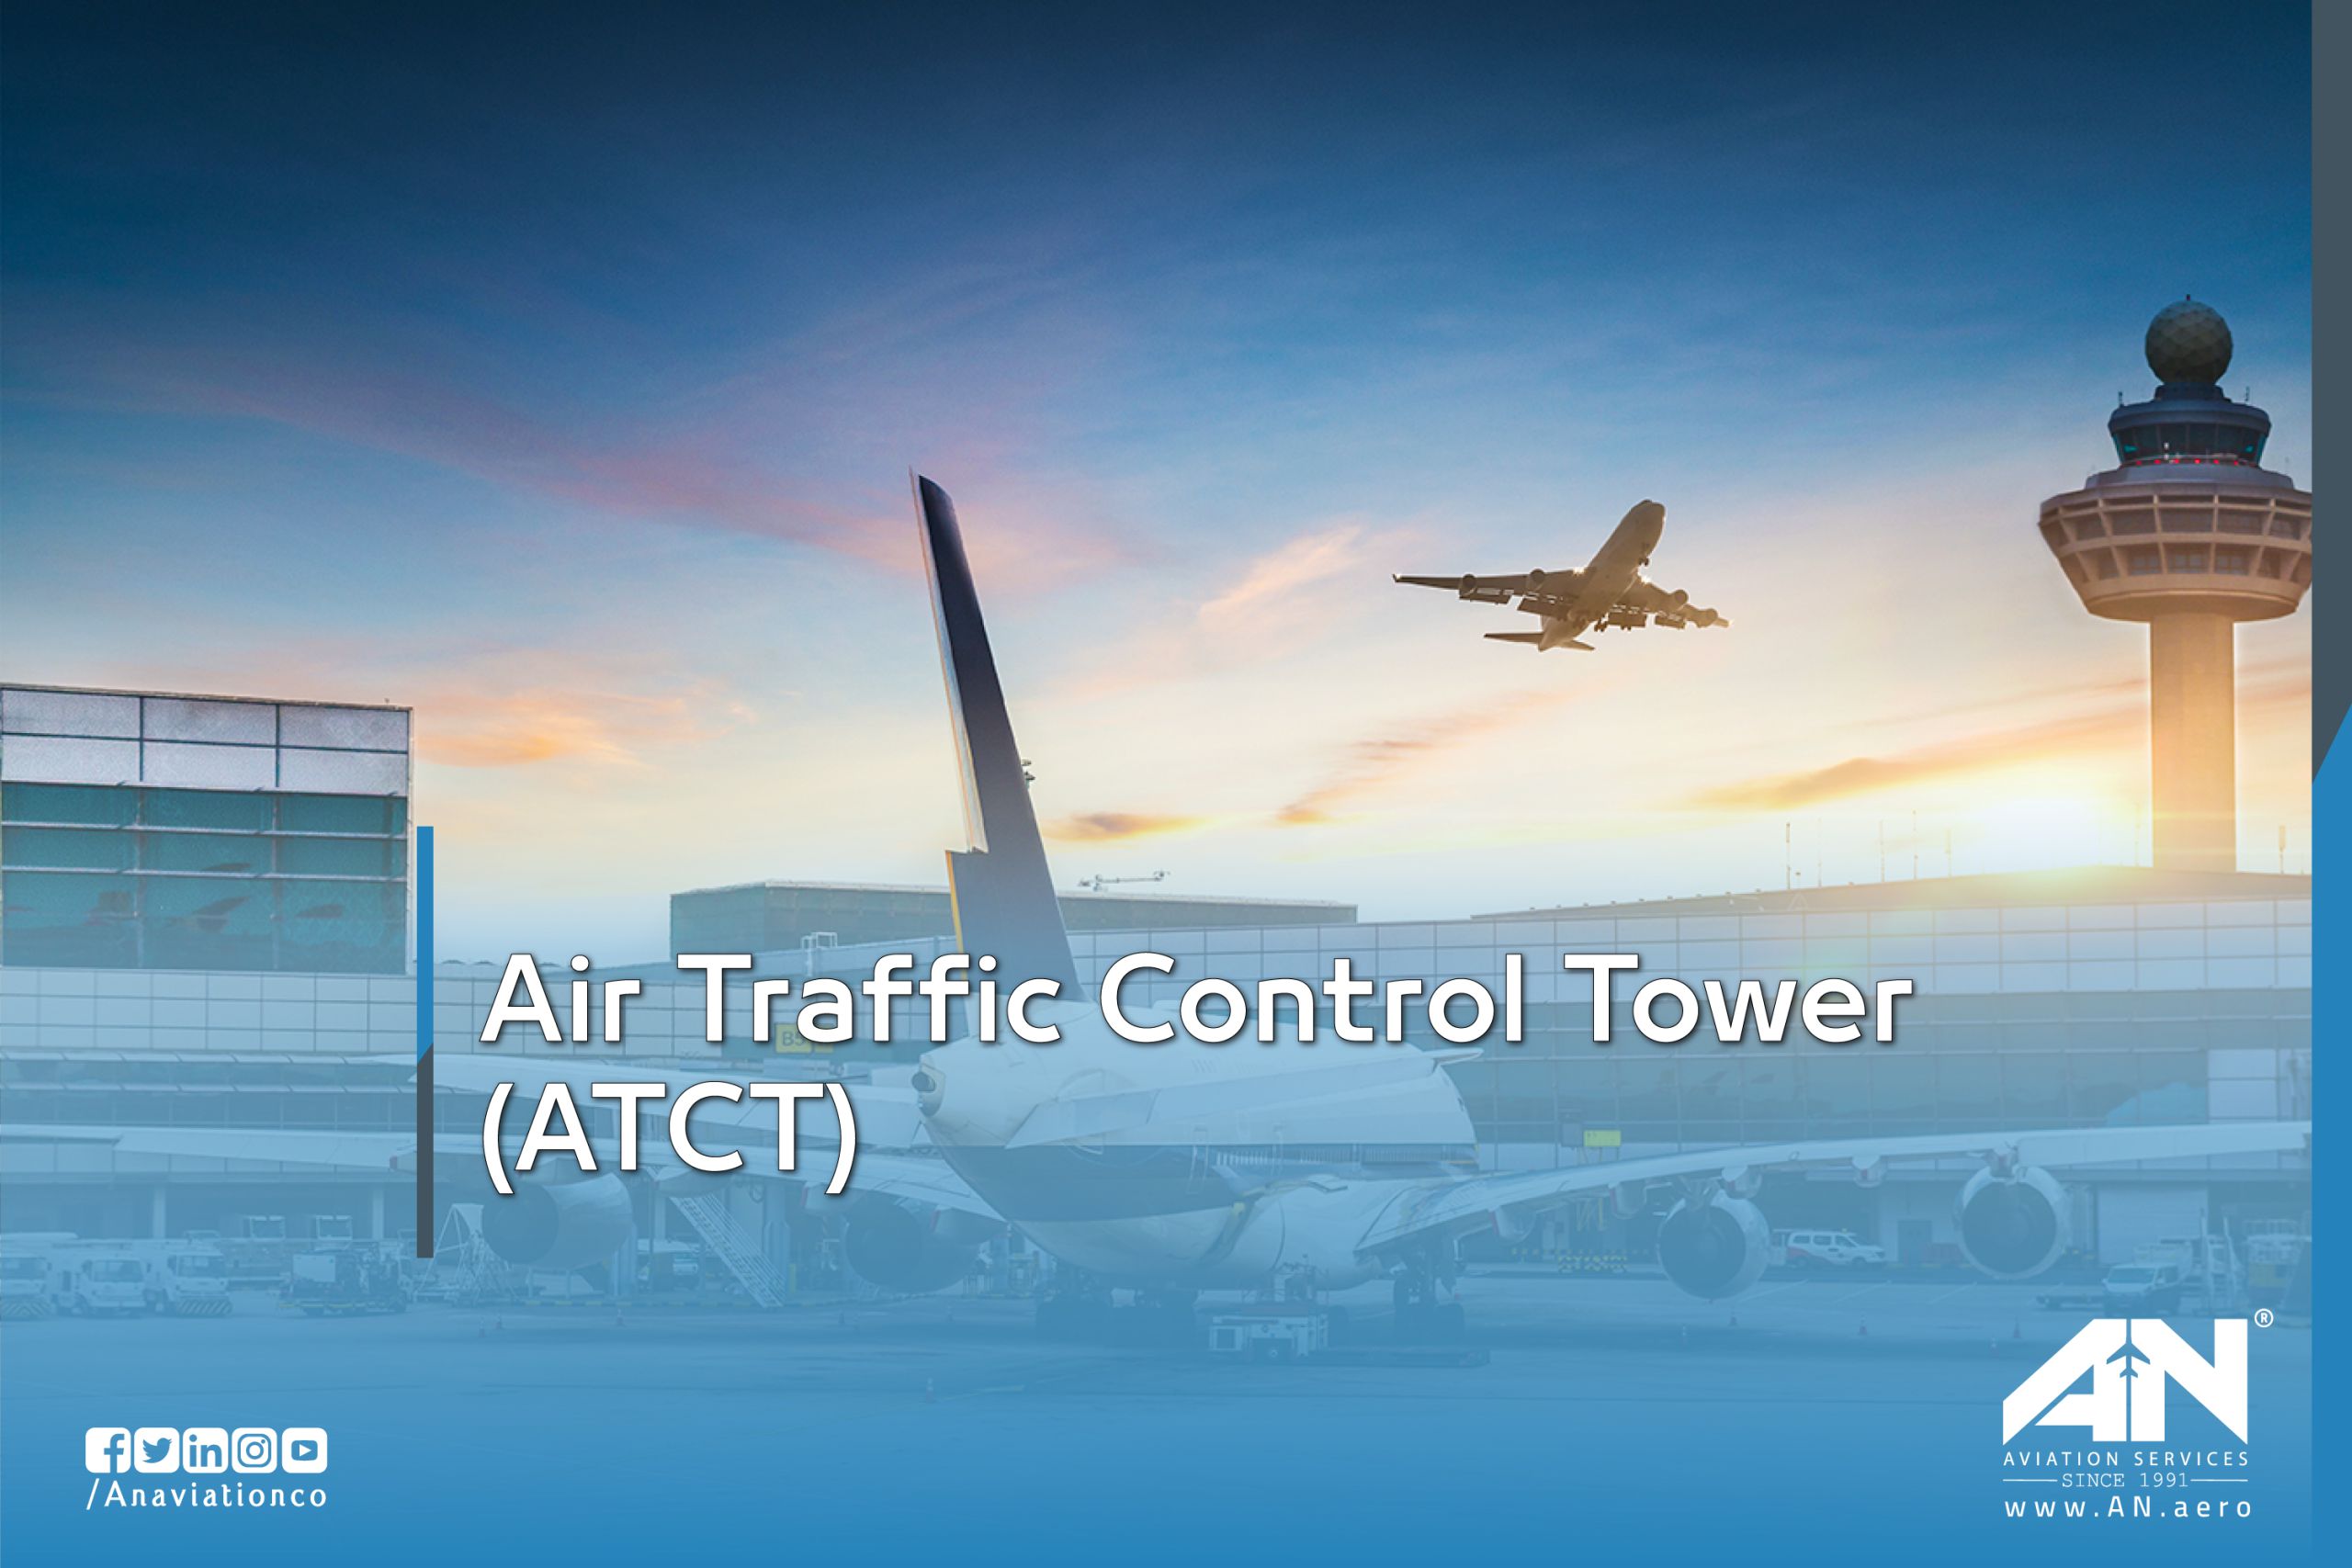 Air traffic control tower: The capability to assist aircraft